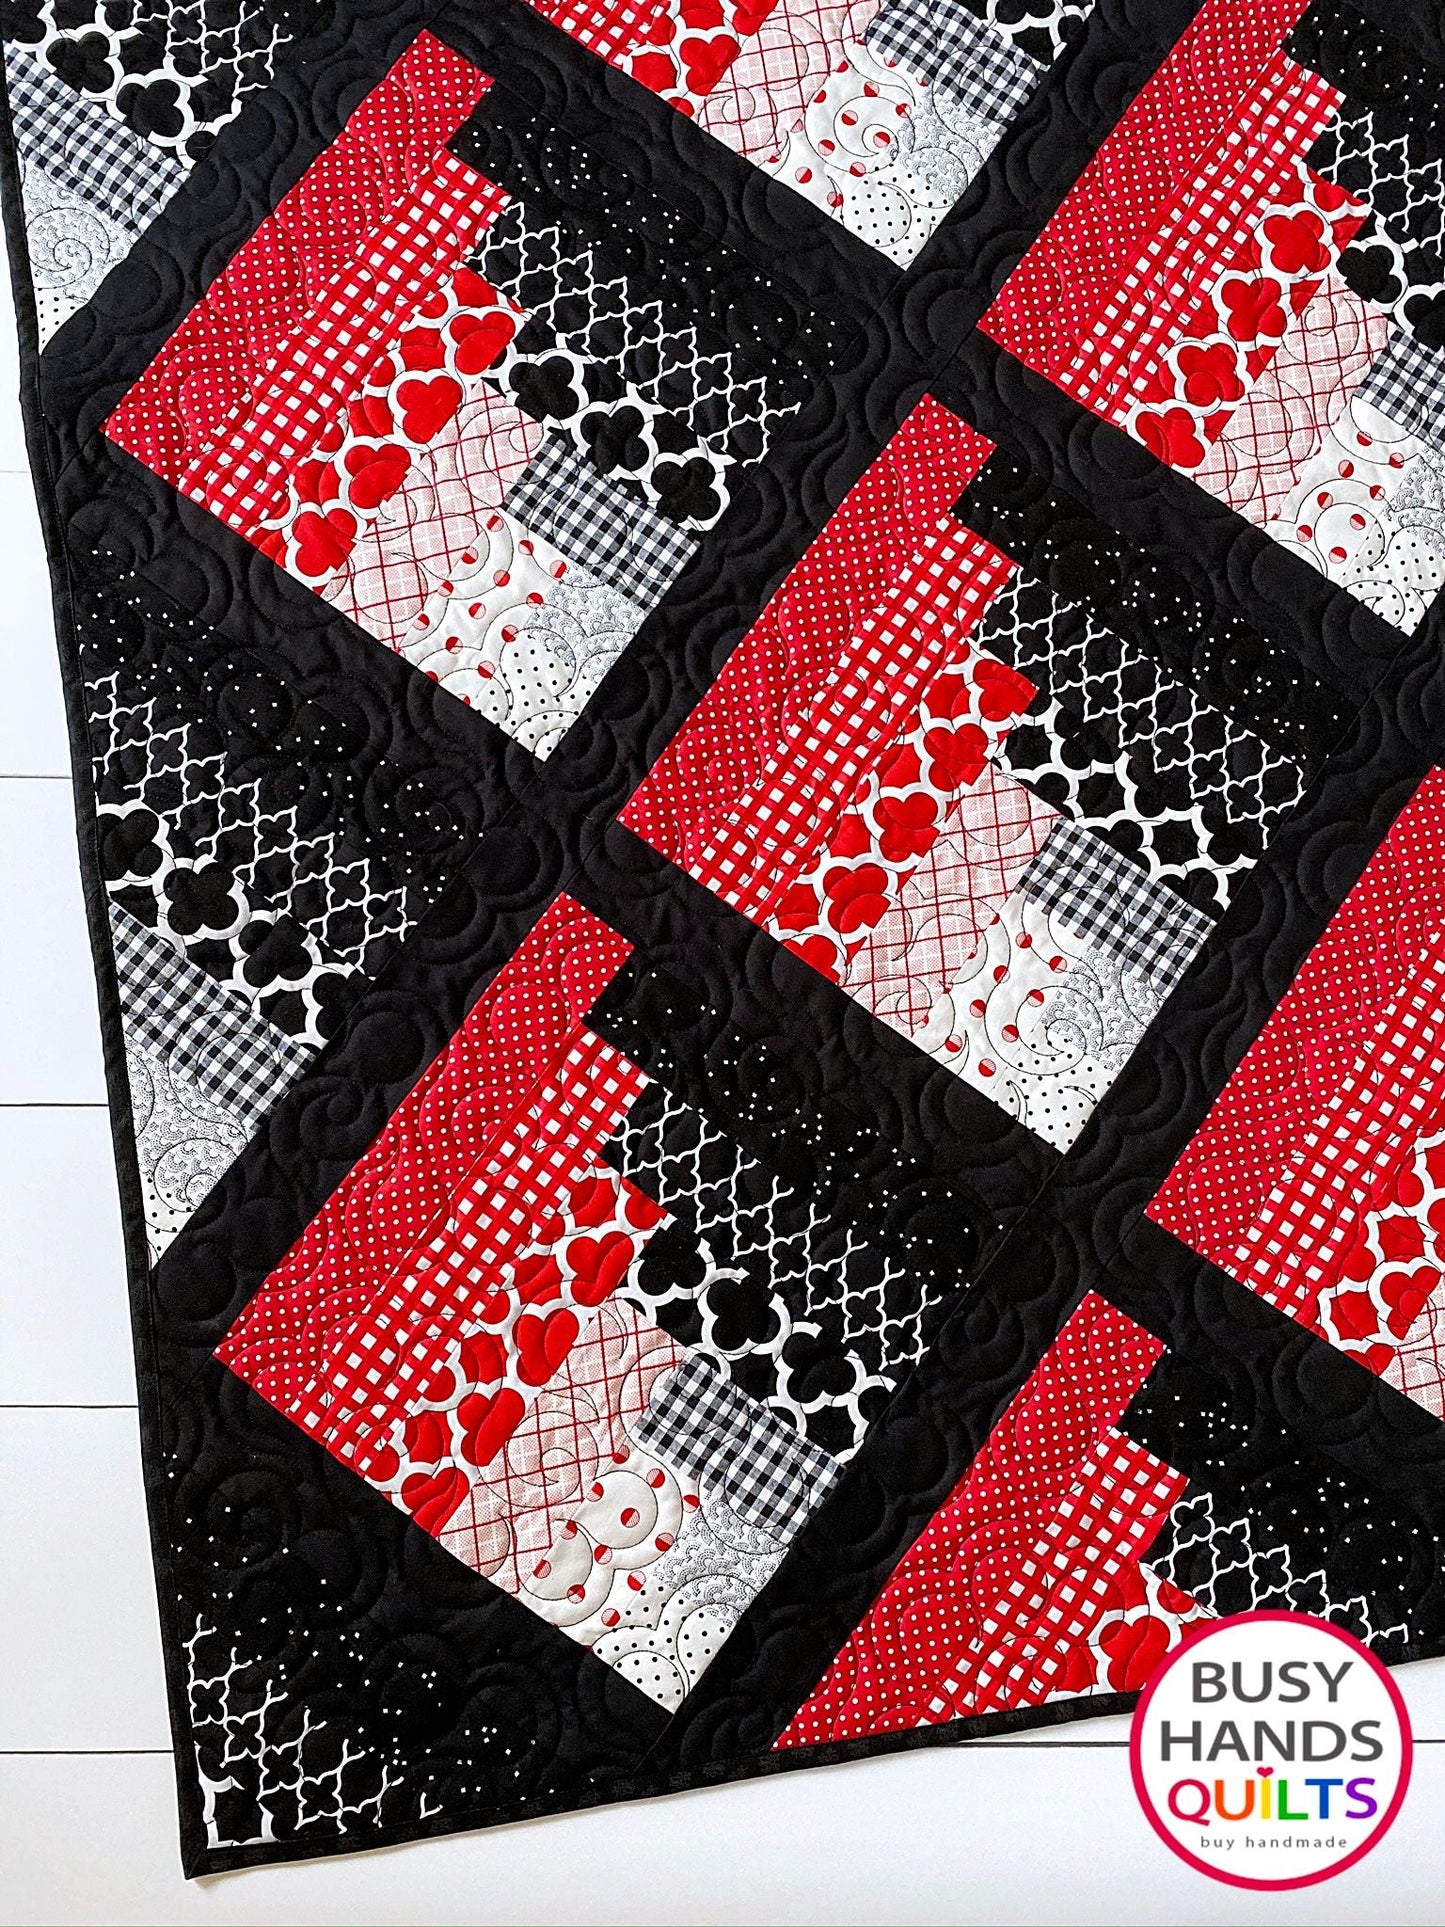 Custom Handmade Waterfall Throw Quilt in Black and Red - Ready to Ship Busy Hands Quilts $415